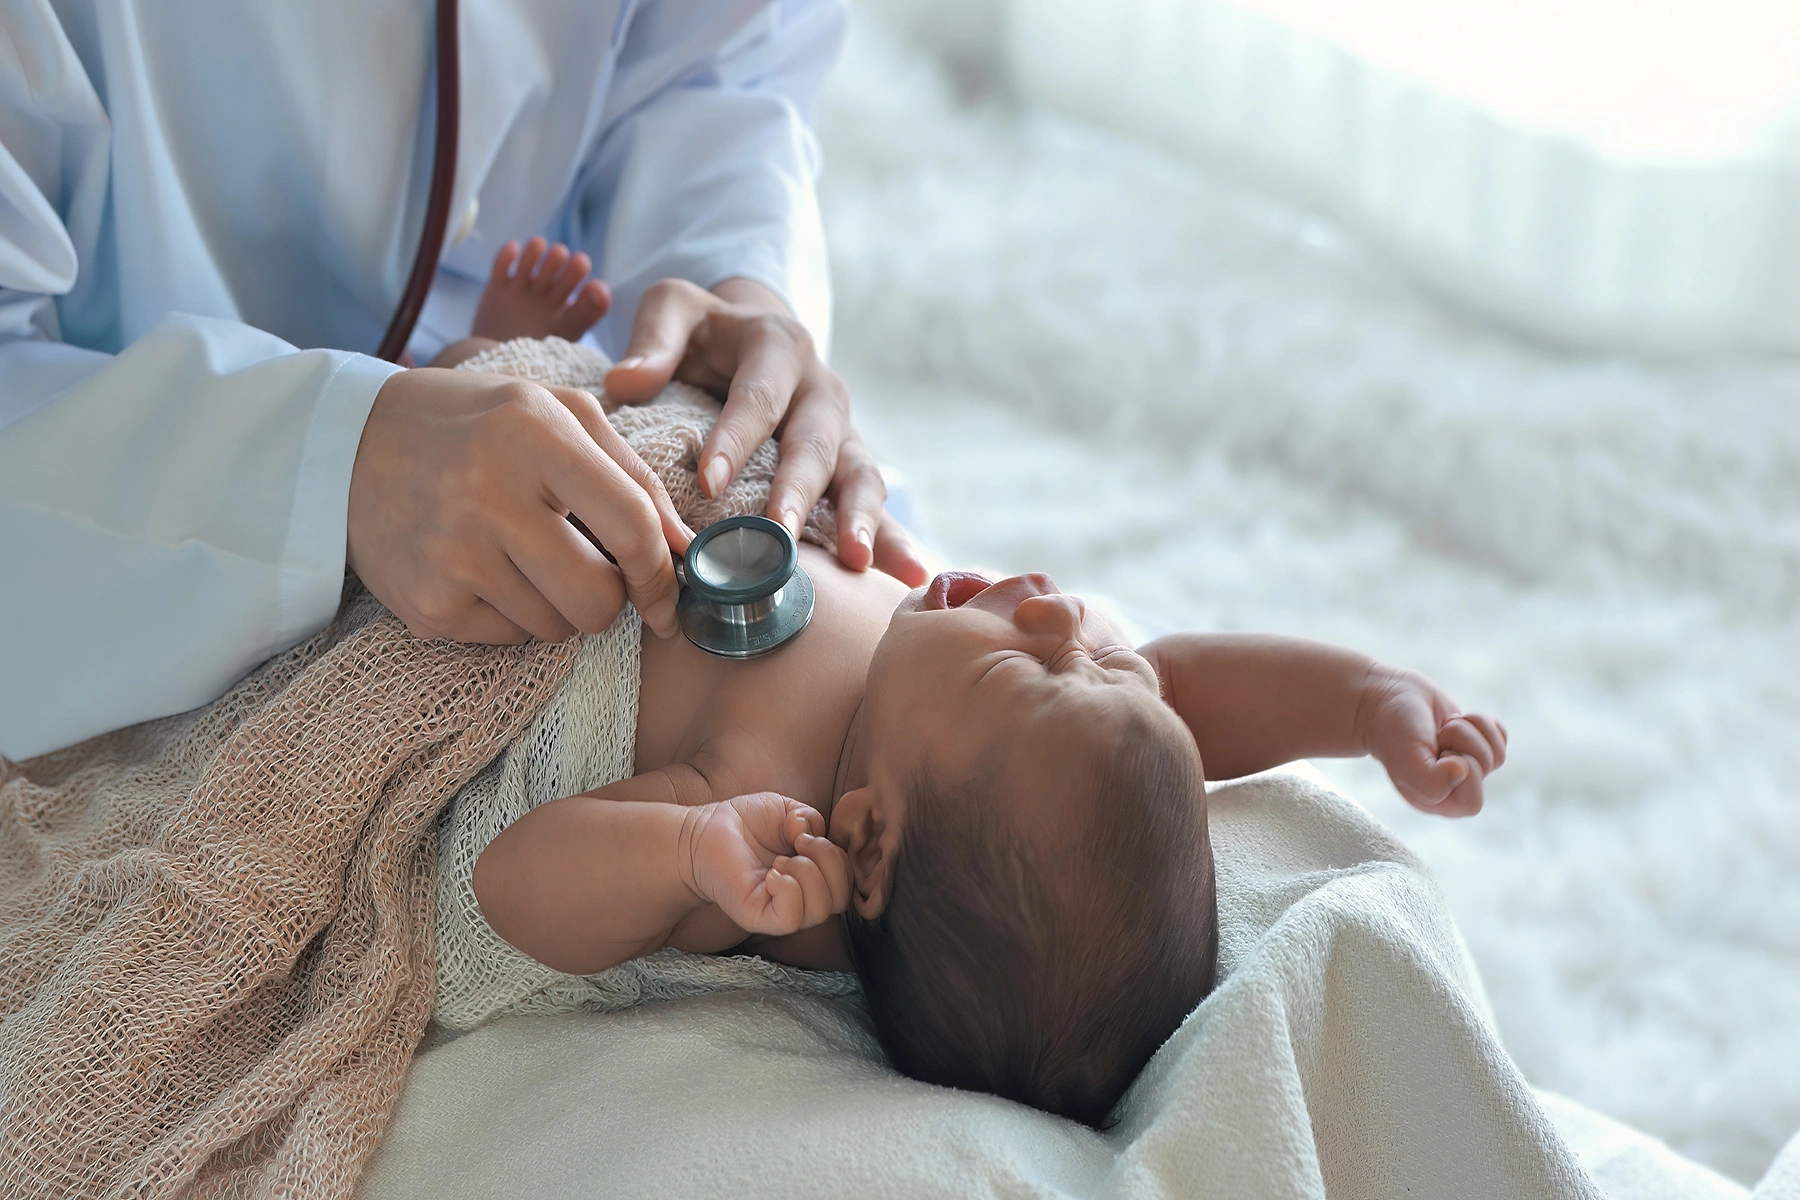 Hands of doctor hold a stethoscope on a small baby's chest - baby cries